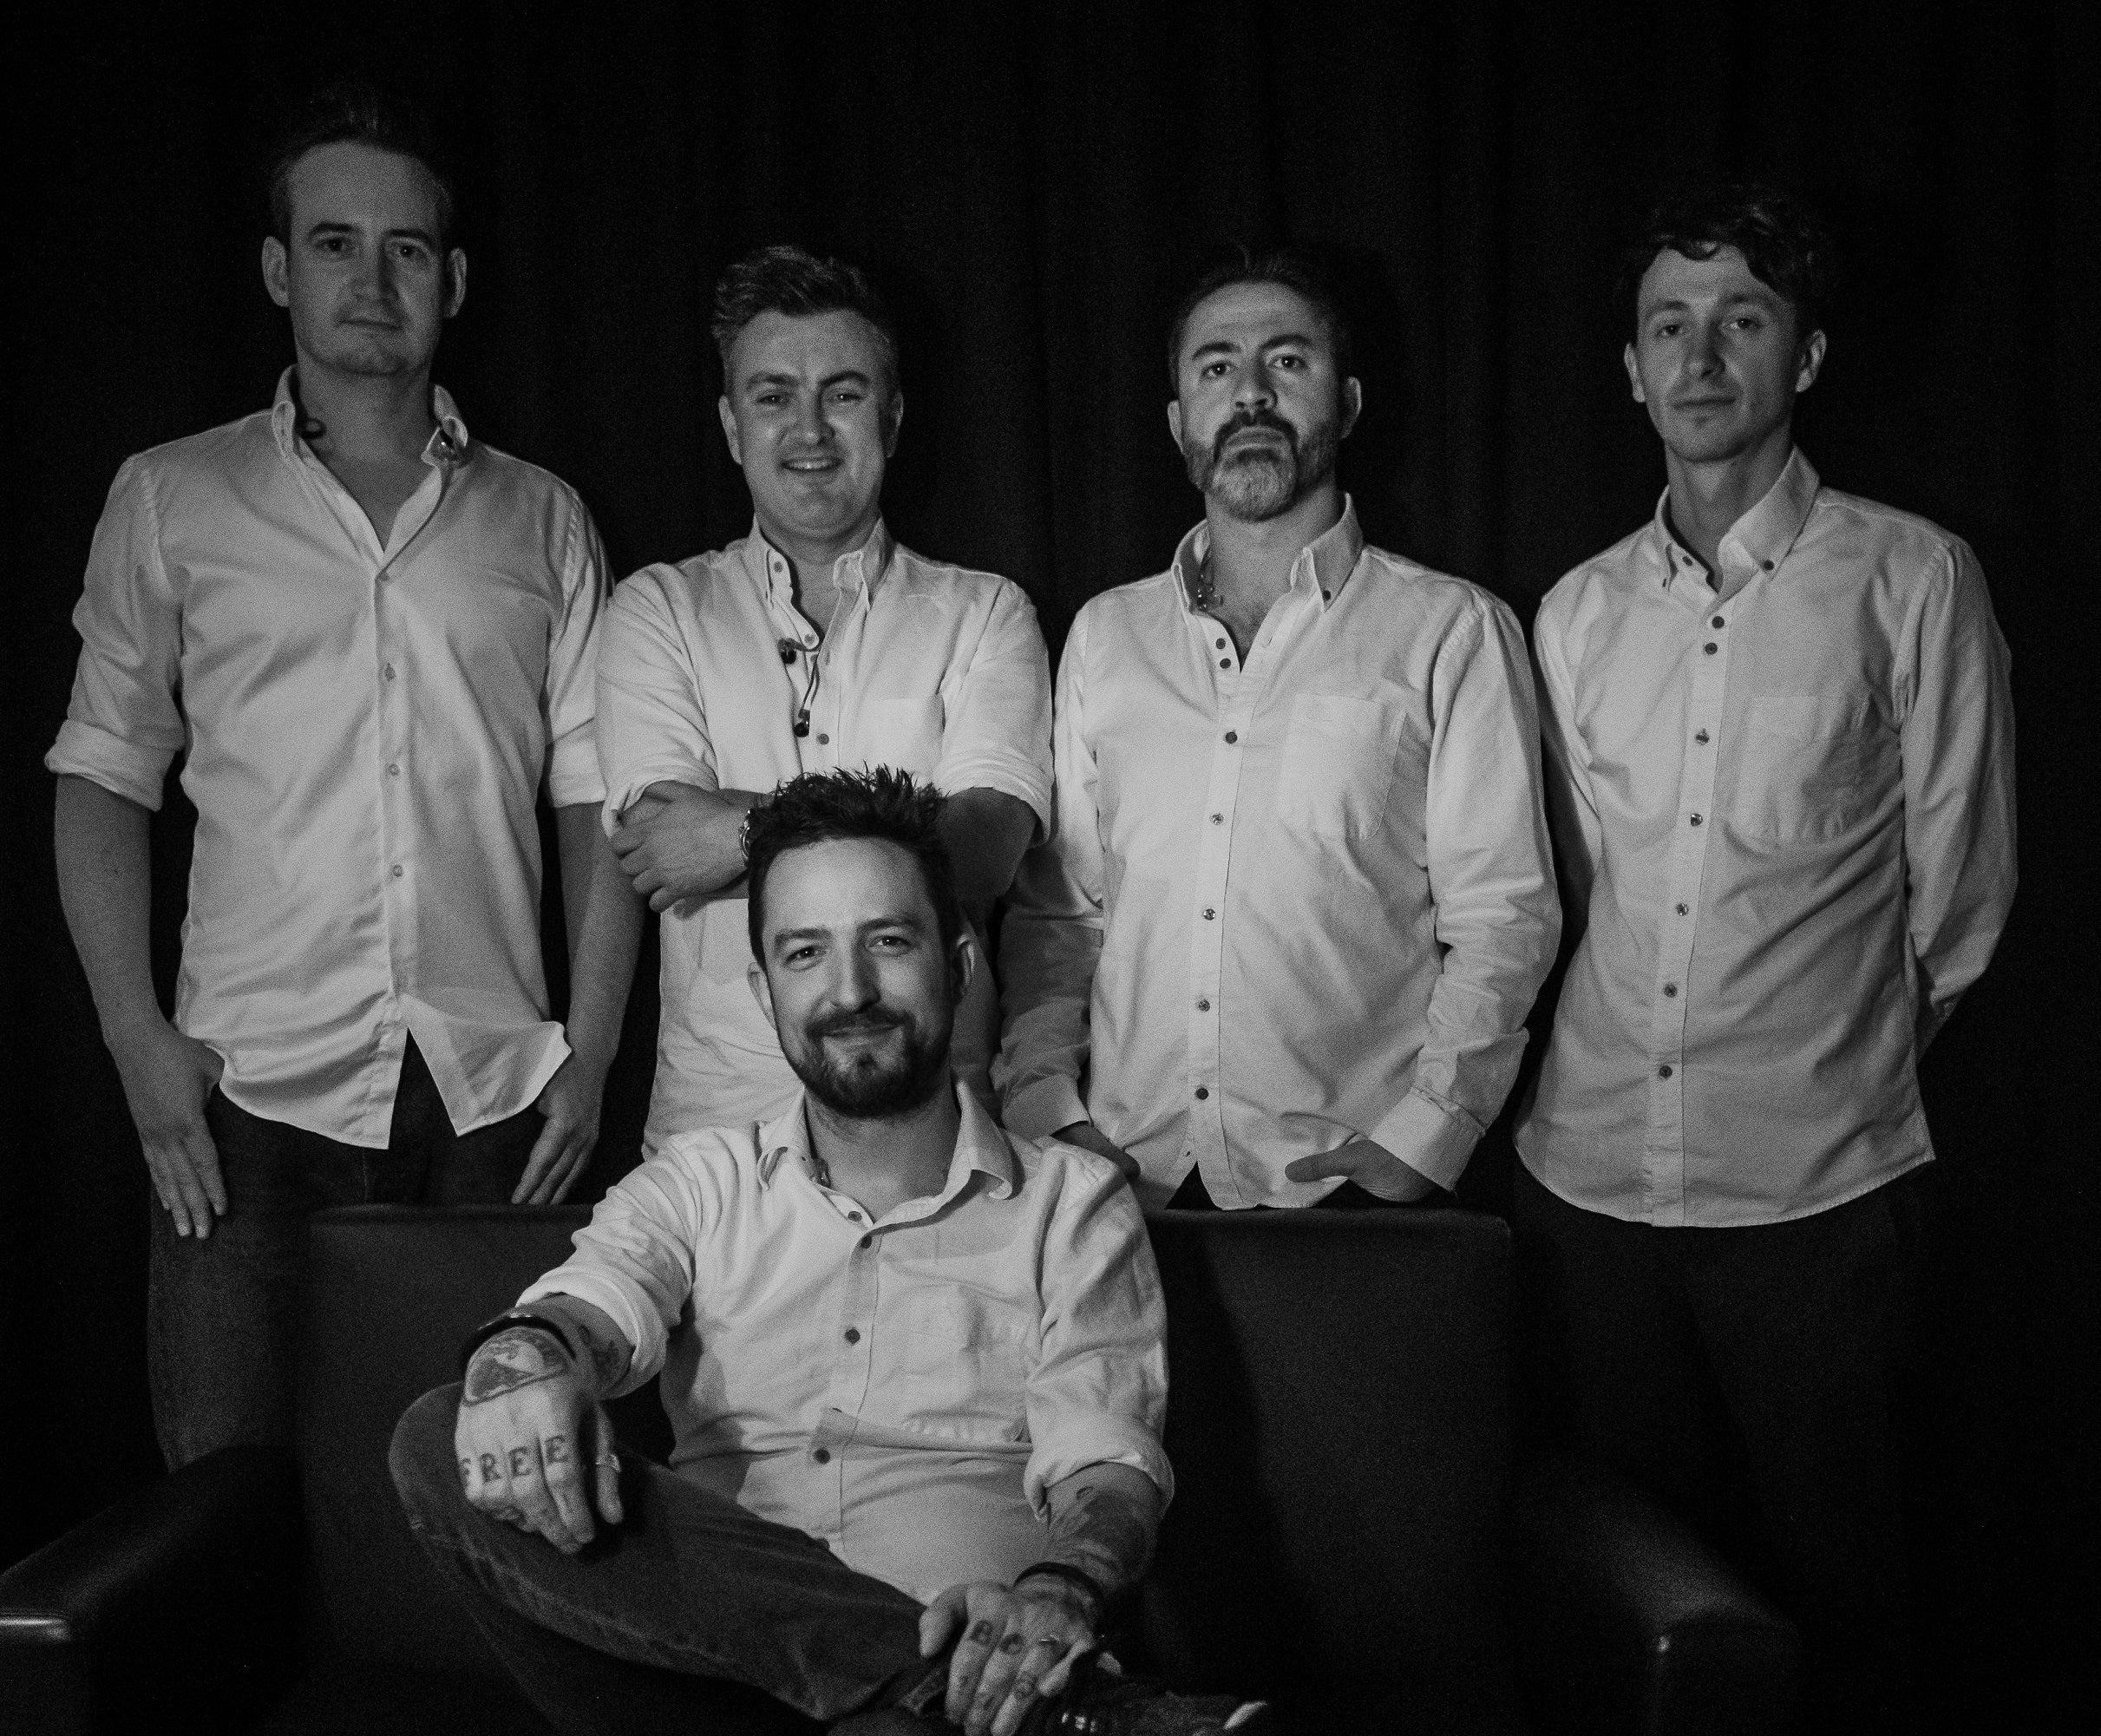 Frank Turner & the Sleeping Souls Event Title Pic